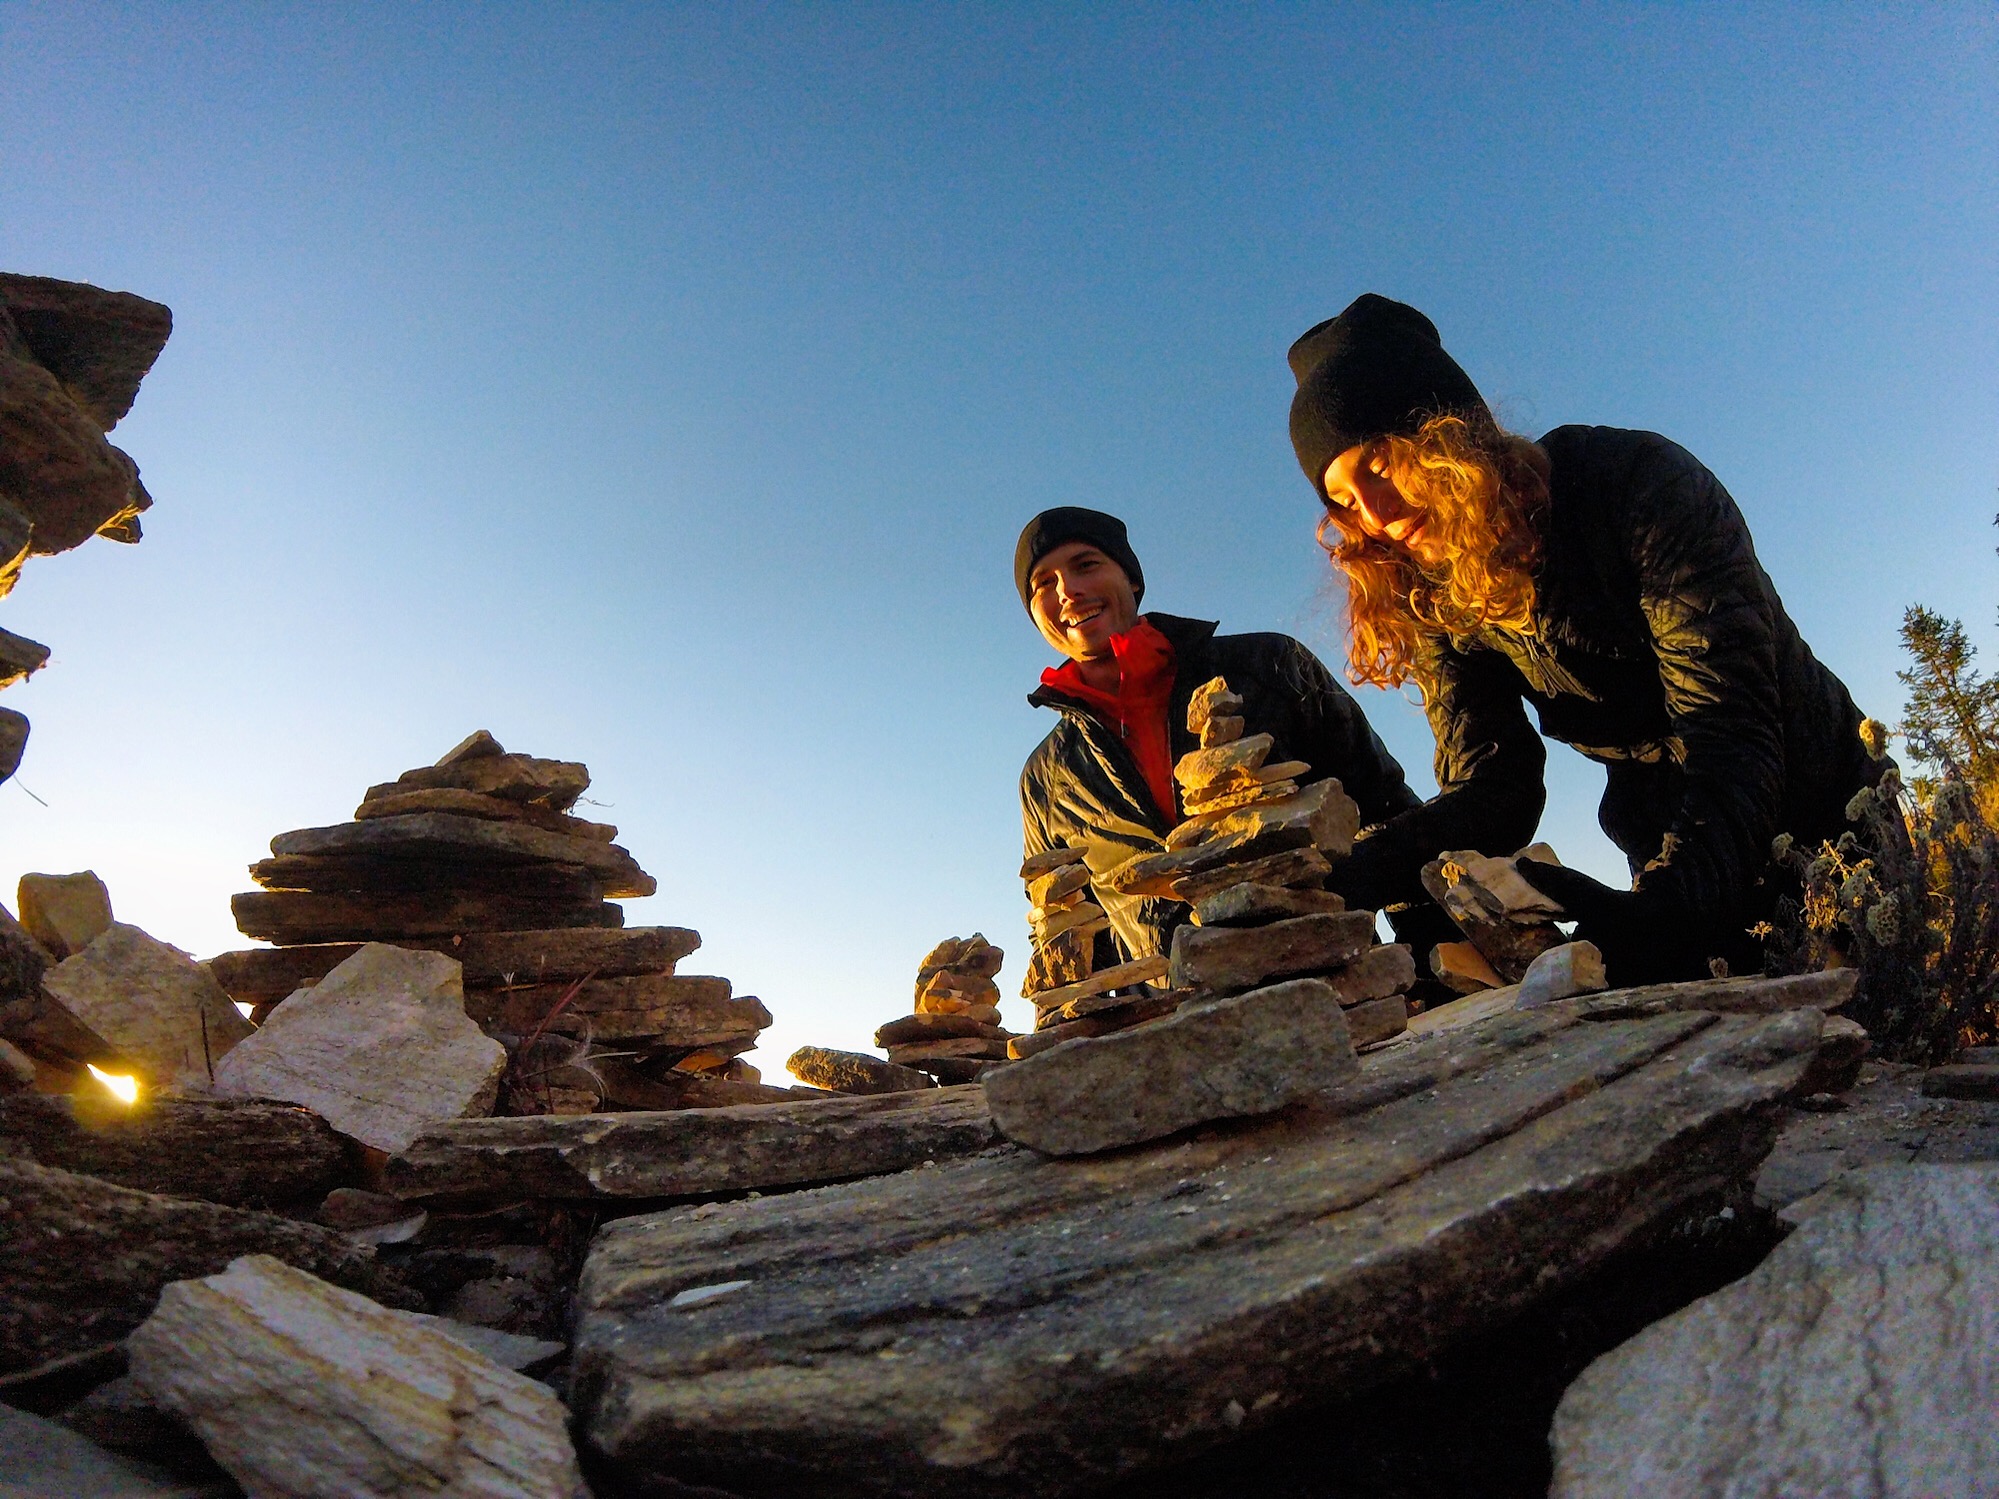 Nov 9.3, 2016We decide to leave our imprint by constructing a stone cairn above all the rest on this small monument ledge. Stacking rocks is an ancient human practice, often marking burial or ceremonial sites. Here we stack them for good luck, homag…